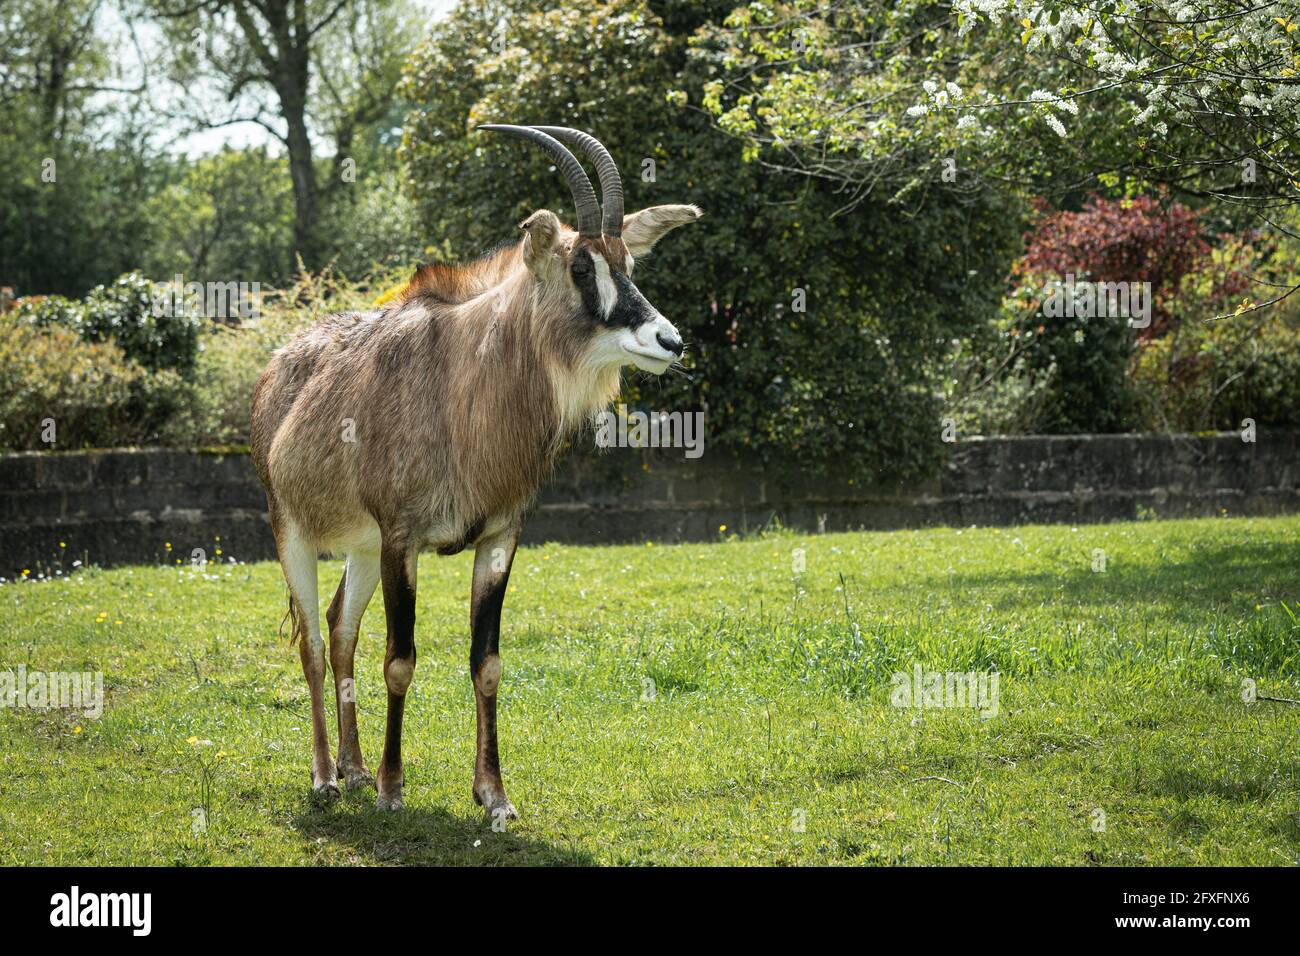 A full length portrait of a roan antelope, Hippotragus equinus. It is standing on the grass field and looking to the right Stock Photo